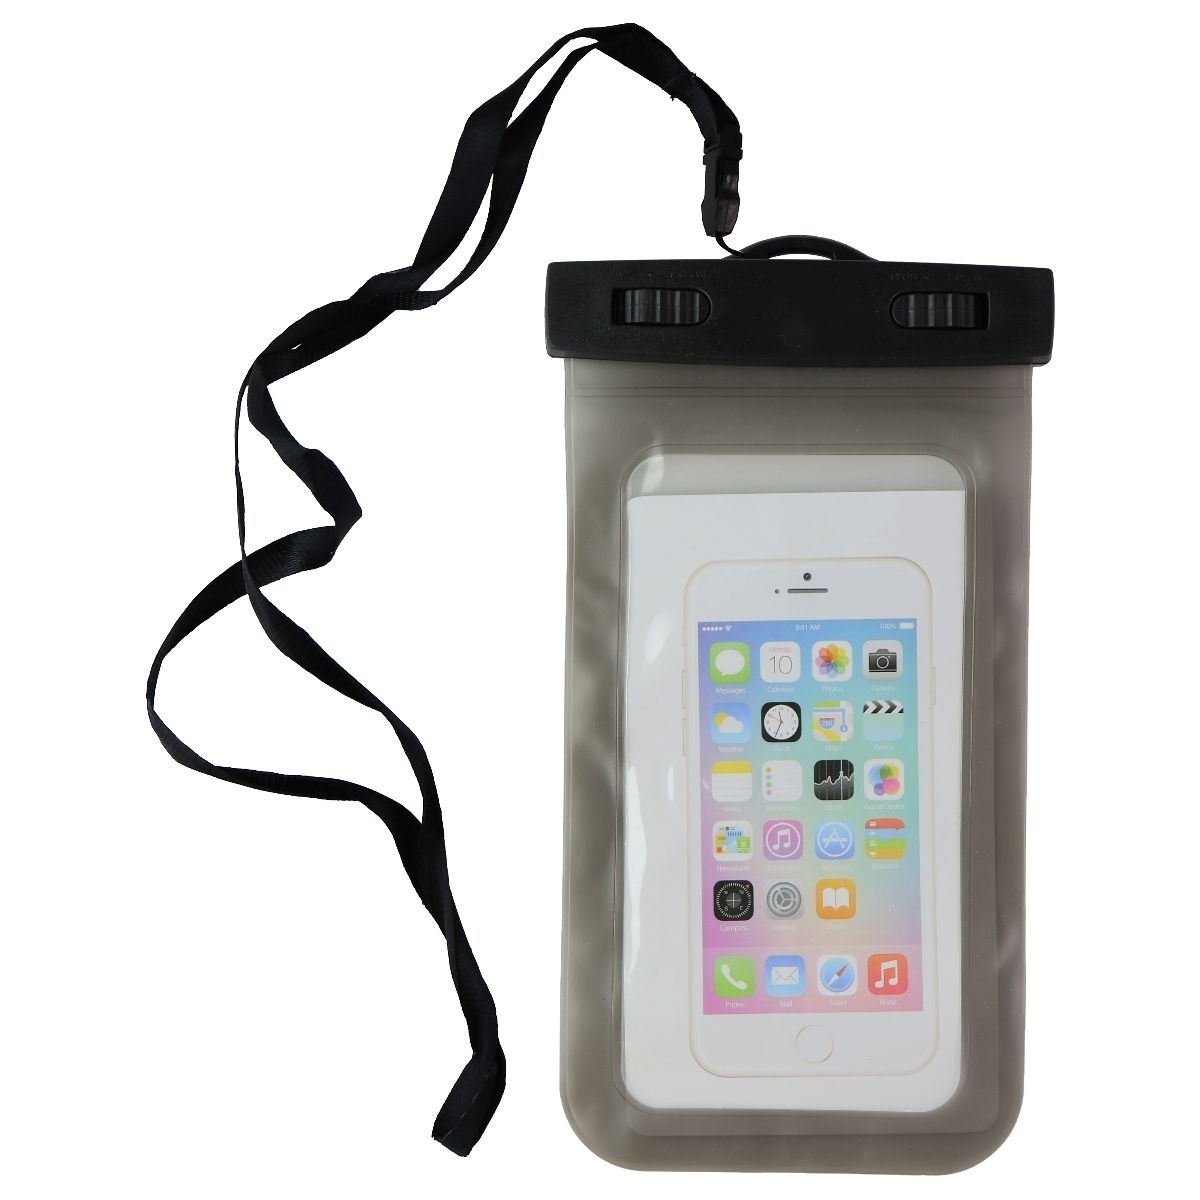 Universal Water Resistant Pouch For Smartphones With Carrying Cord - Black